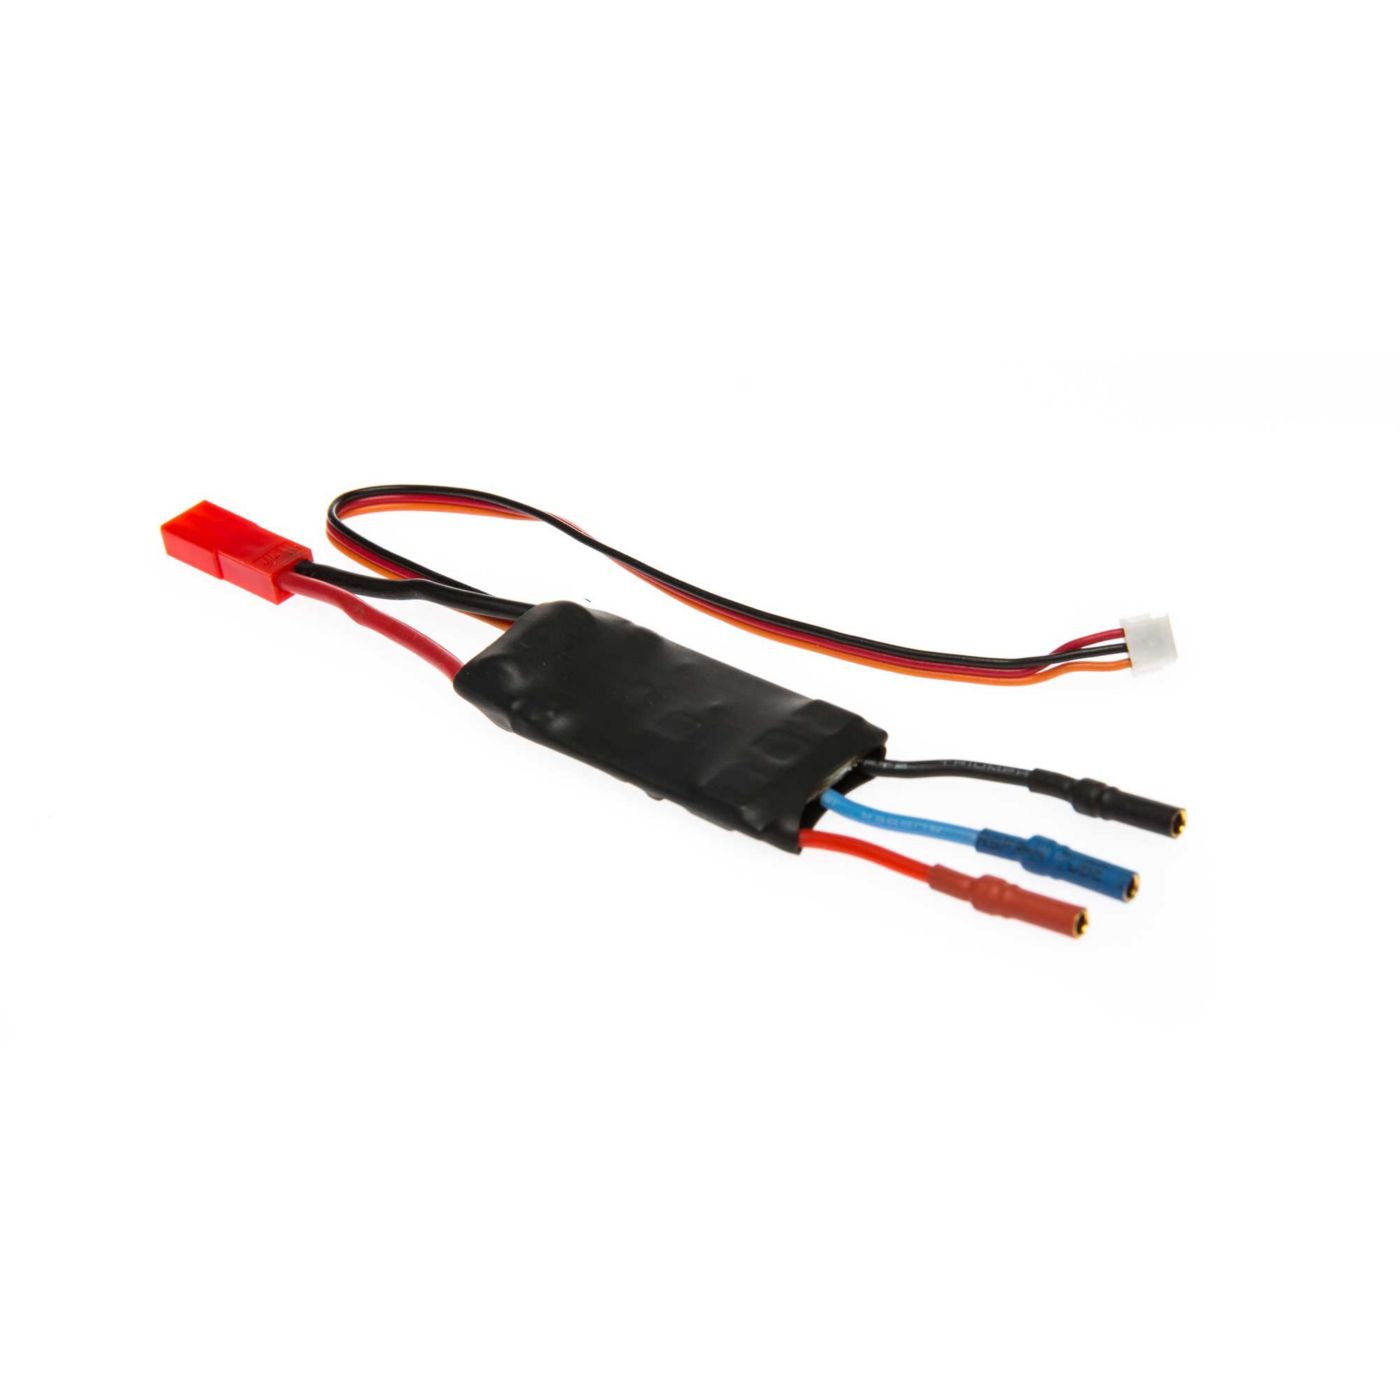 Blade 20A Brushless ESC: Fusion 180 BLH5820